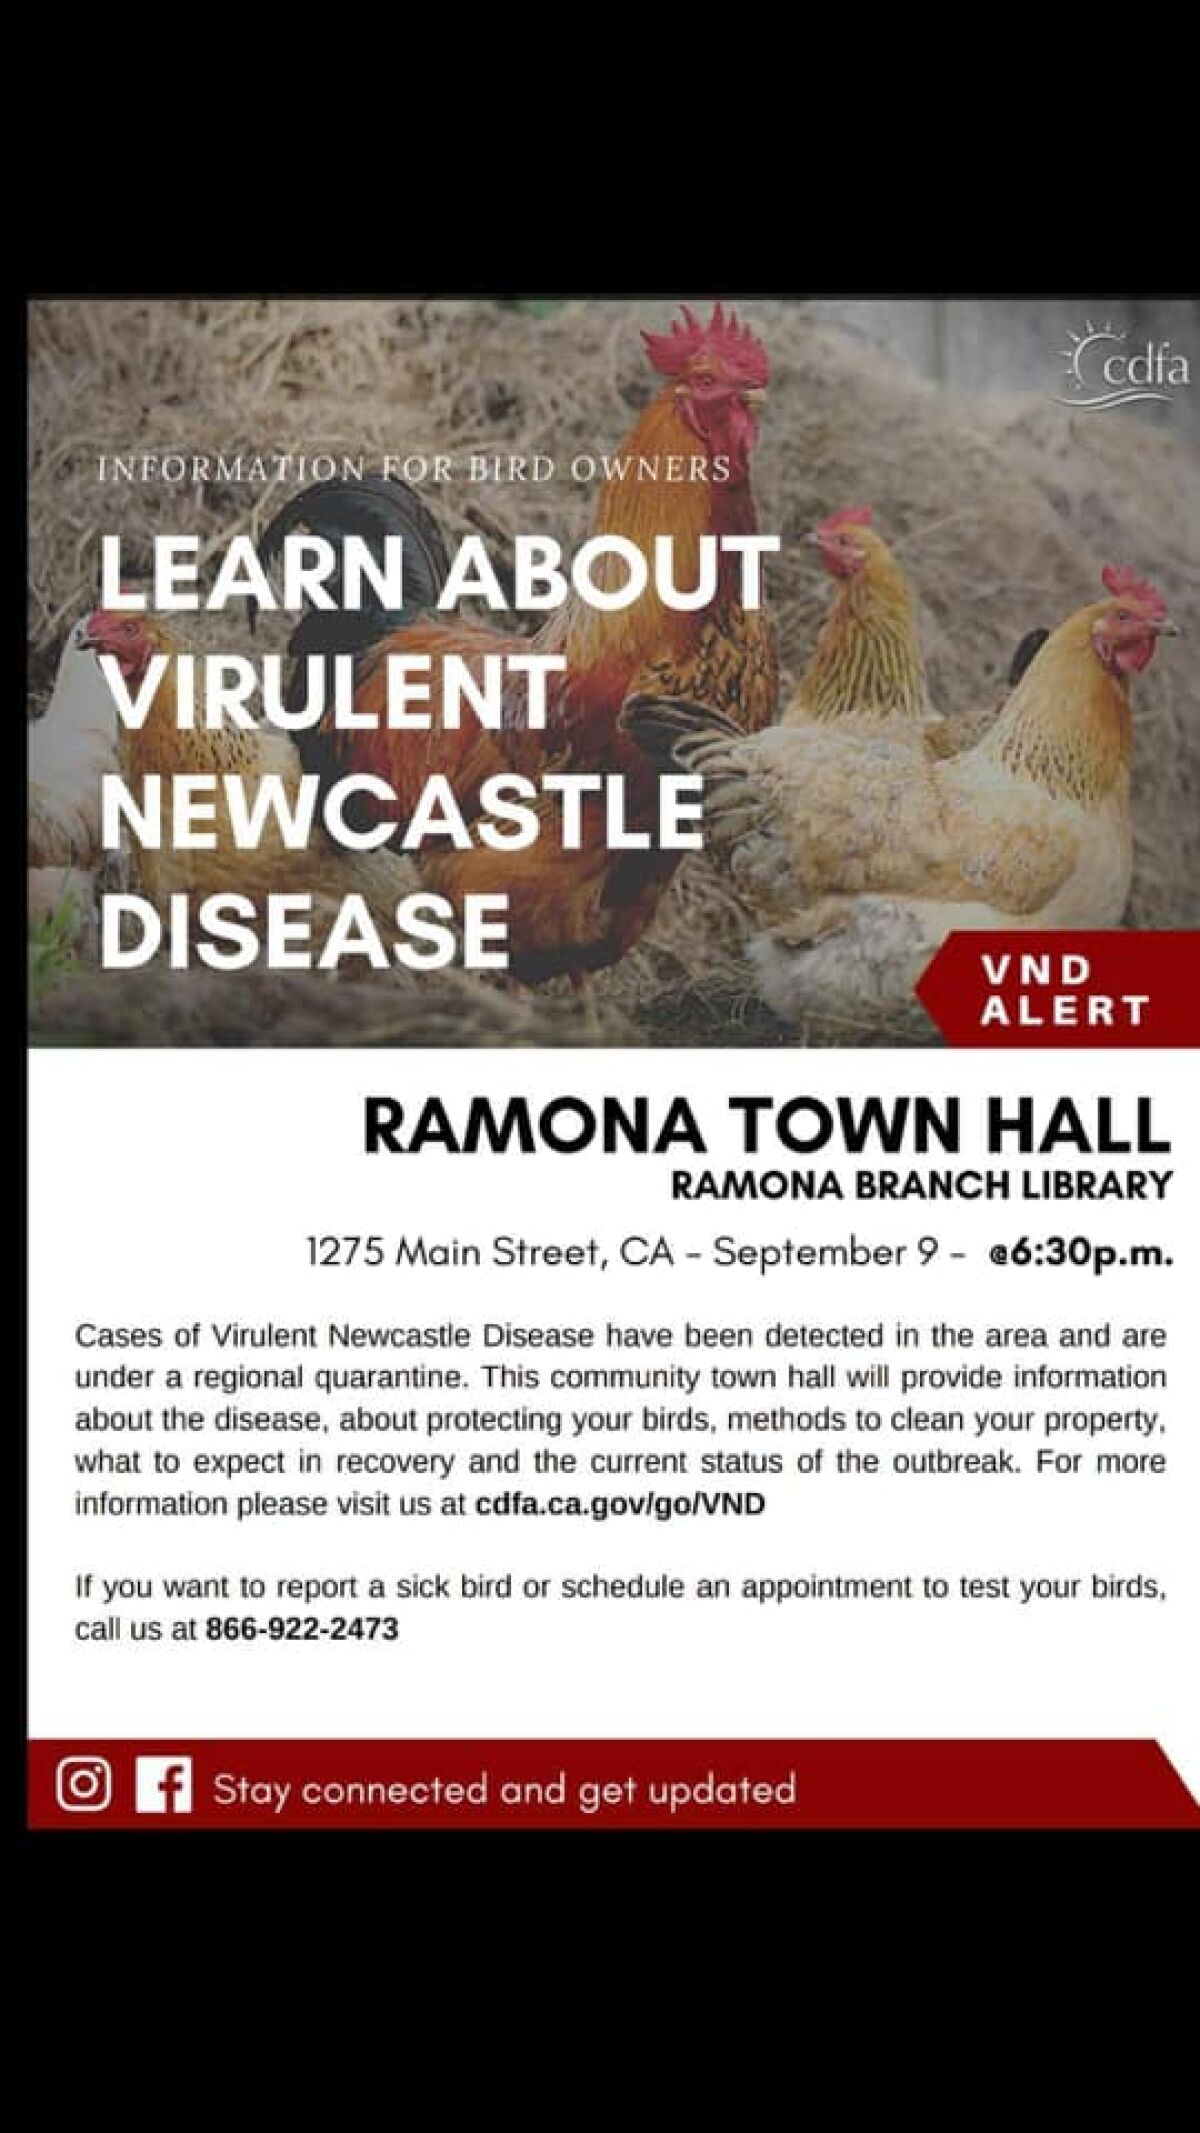 California Department of Food & Agriculture will hold a meeting in Ramona Library to discuss Newcastle disease.